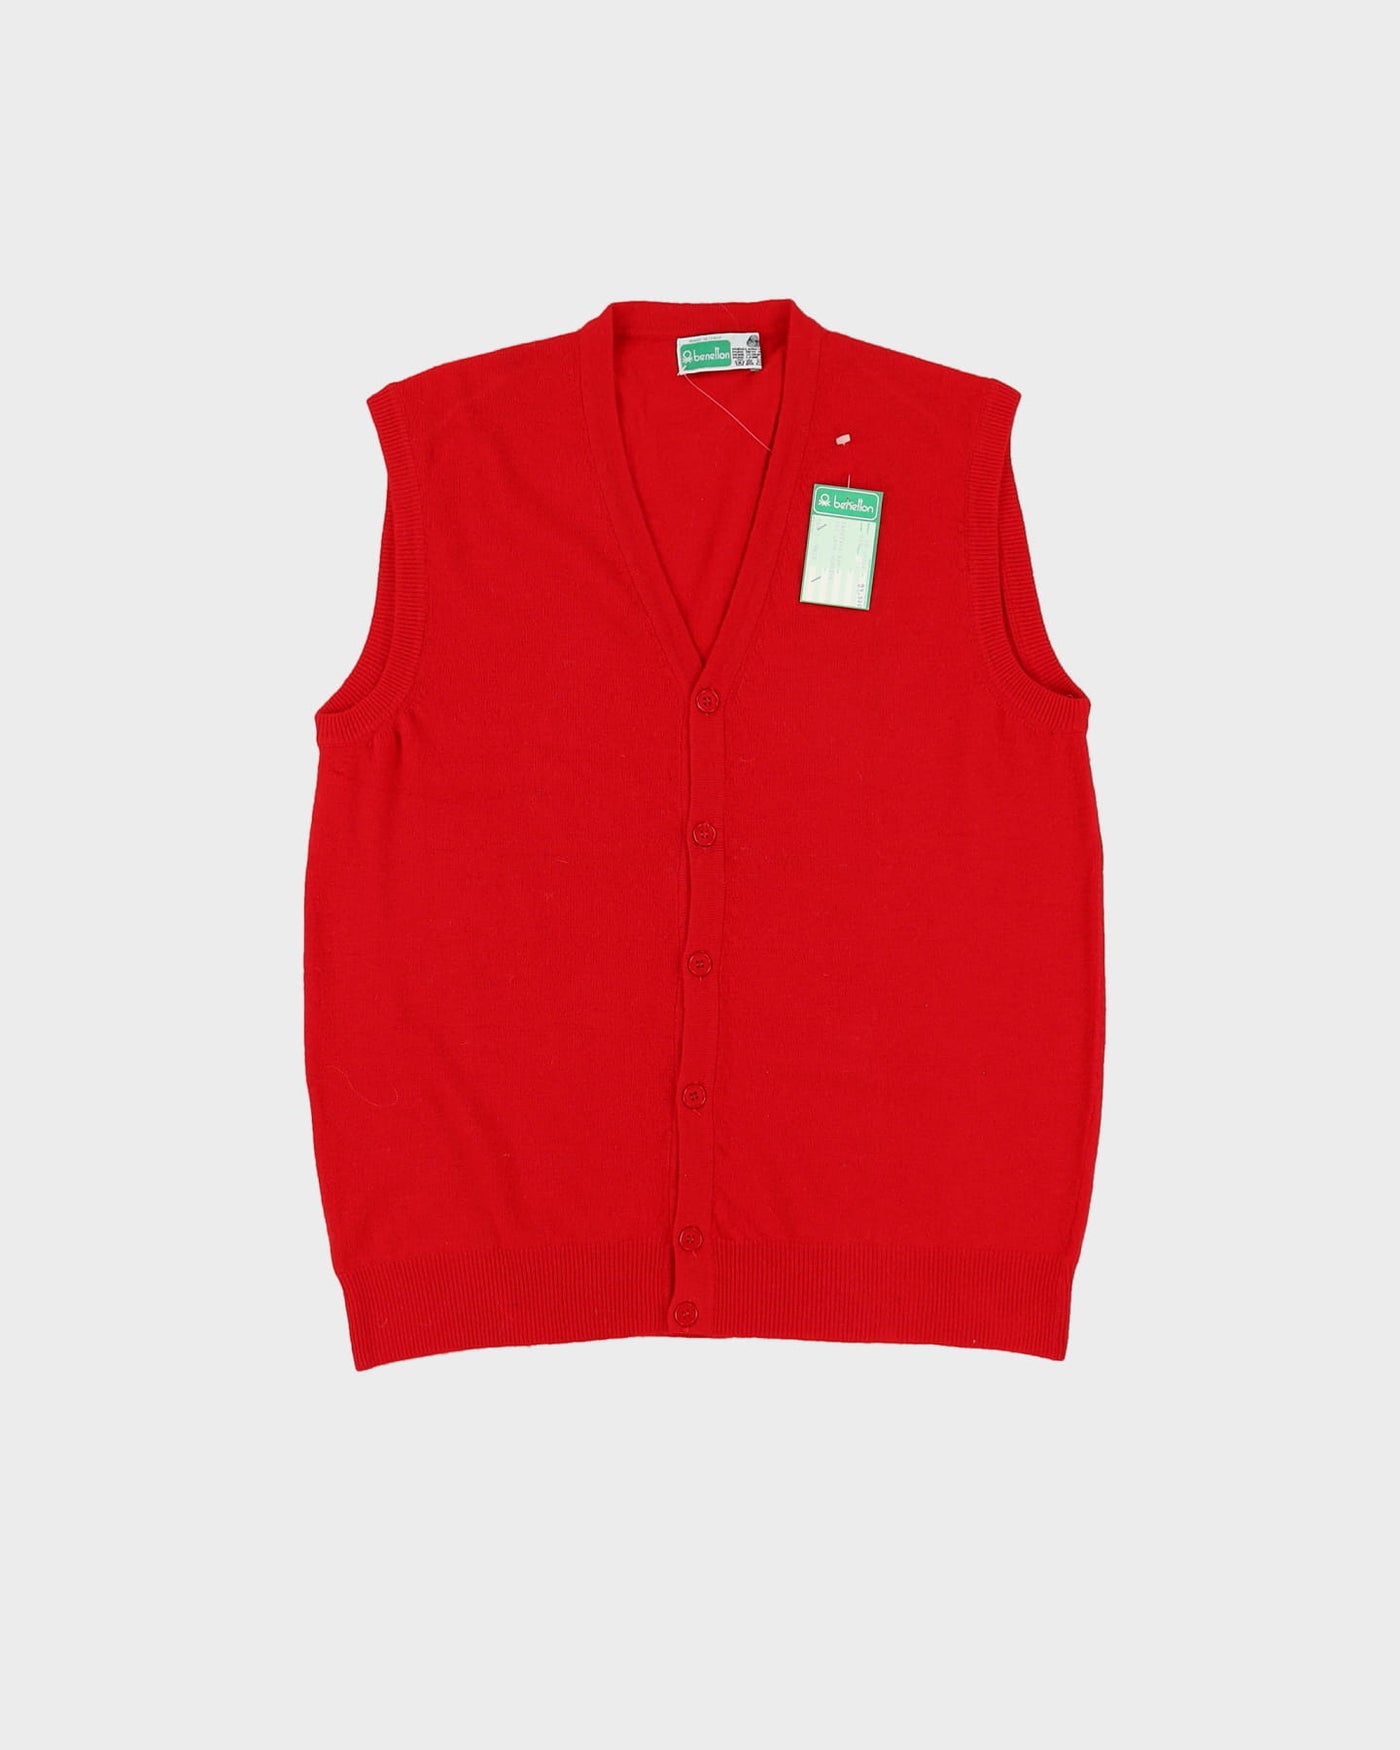 Vintage 70s Deadstock With Tags Benneton Red Cardigan Sweater Vest / Tank Knit - M / L